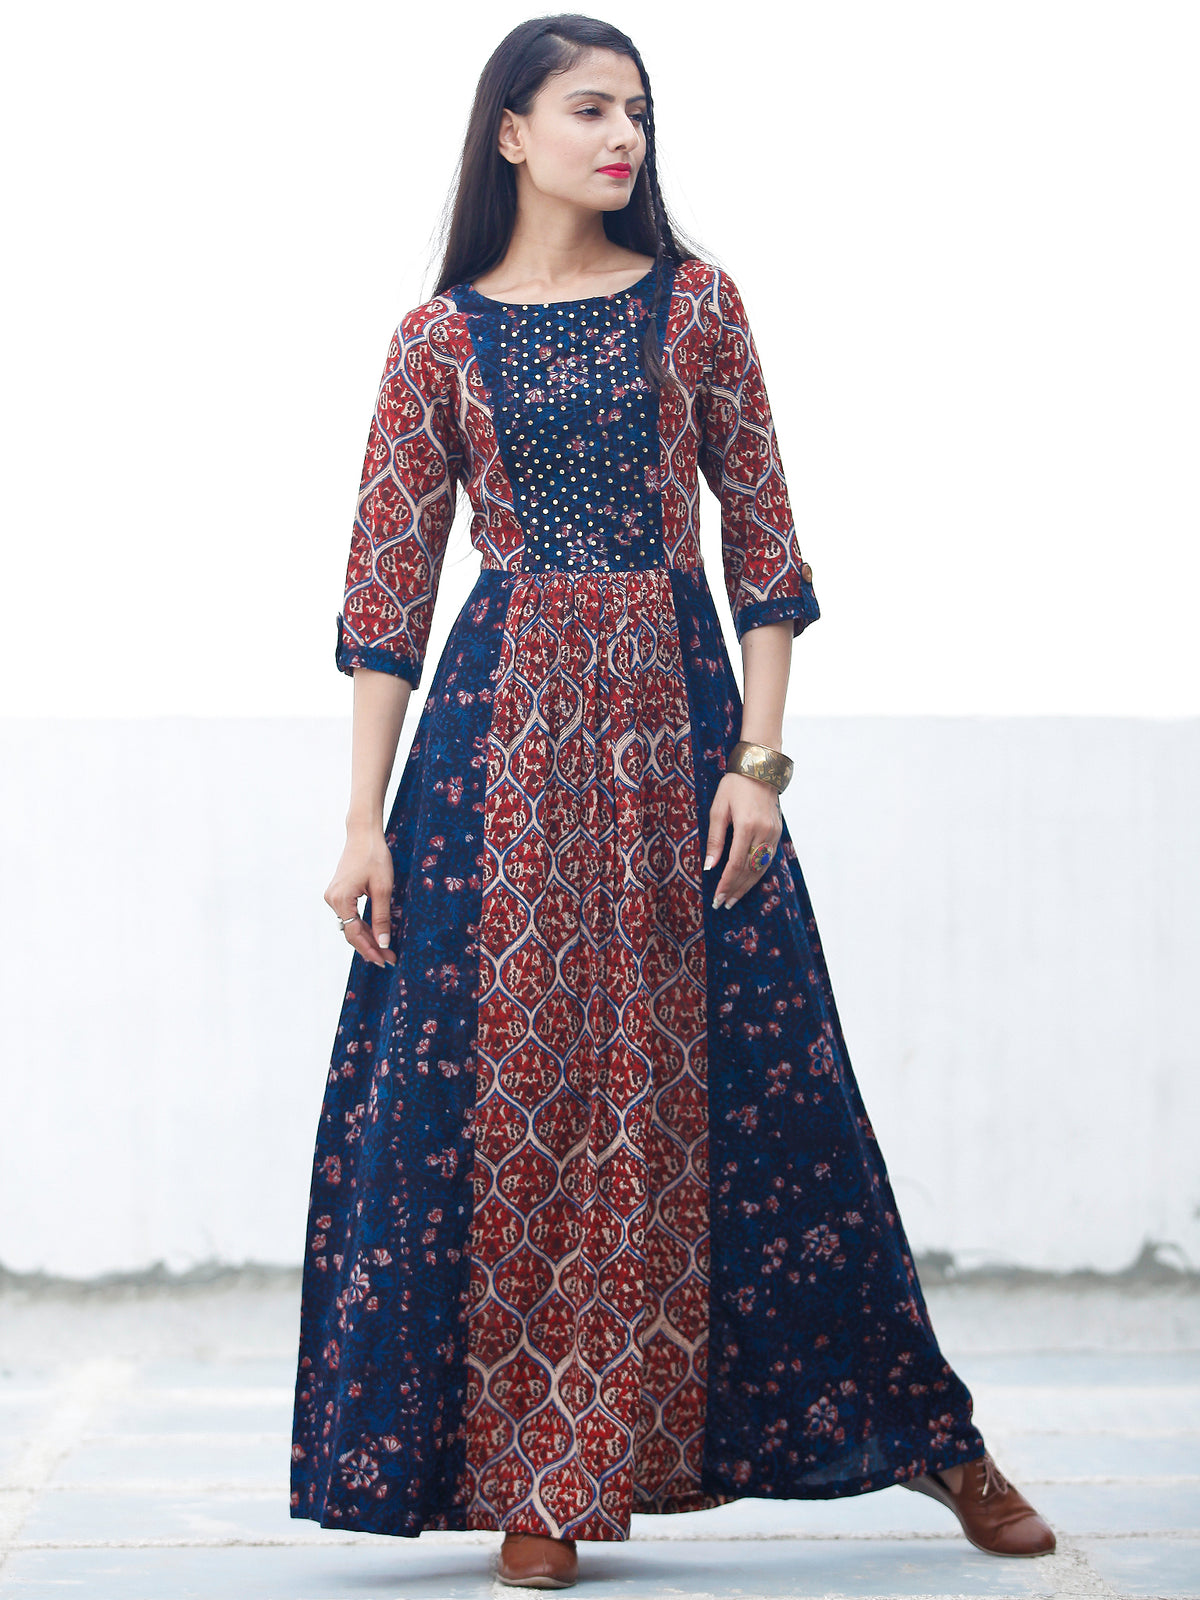 Block Sequence - Hand Block Printed Long Cotton Dress With Embroidery - D349F1807